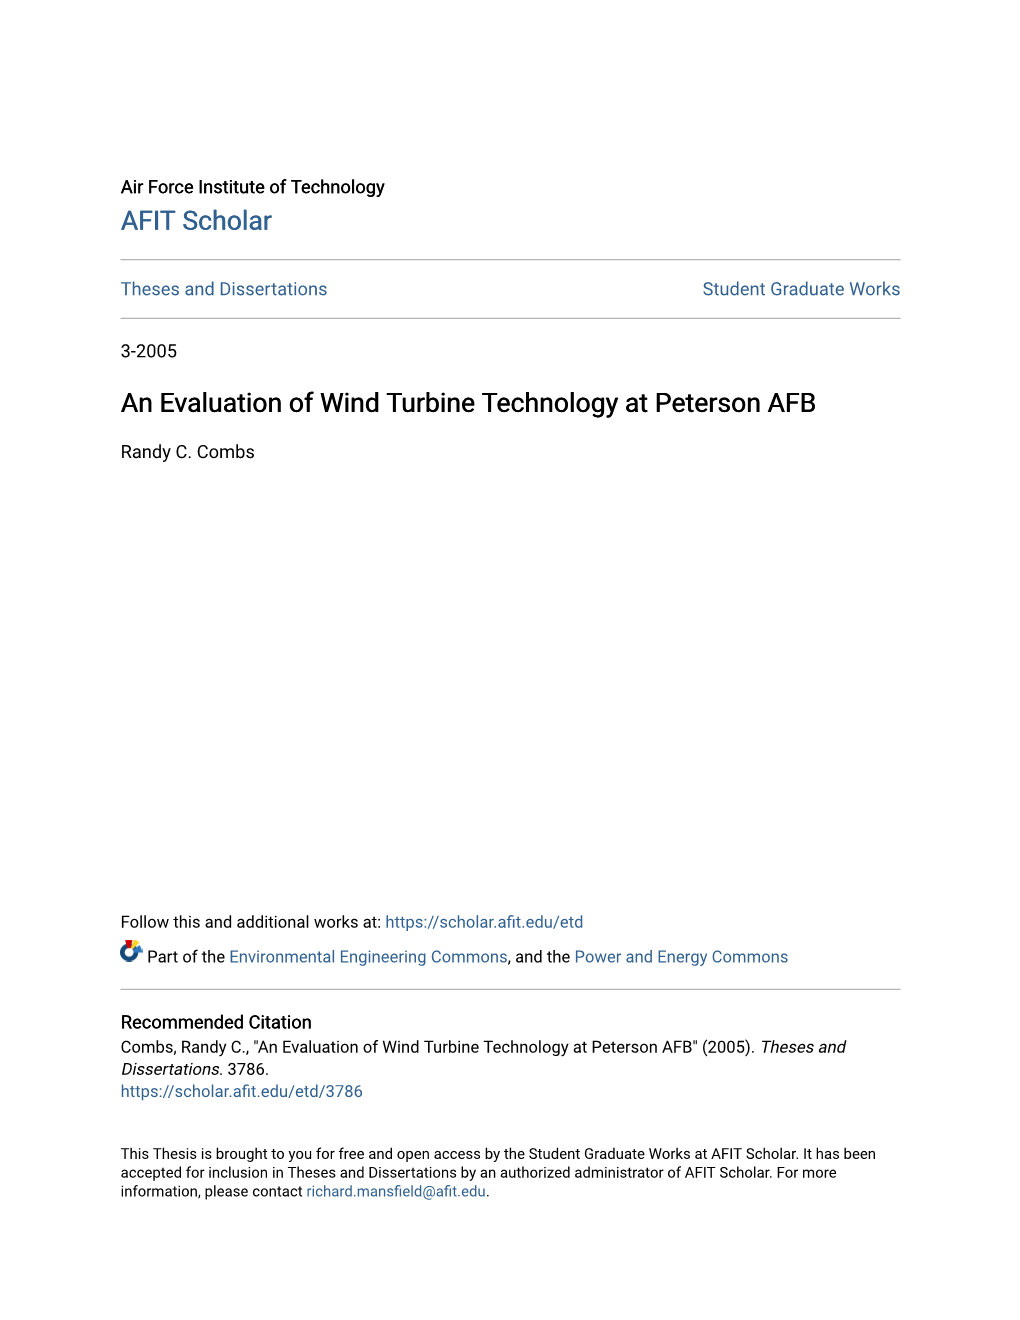 An Evaluation of Wind Turbine Technology at Peterson AFB